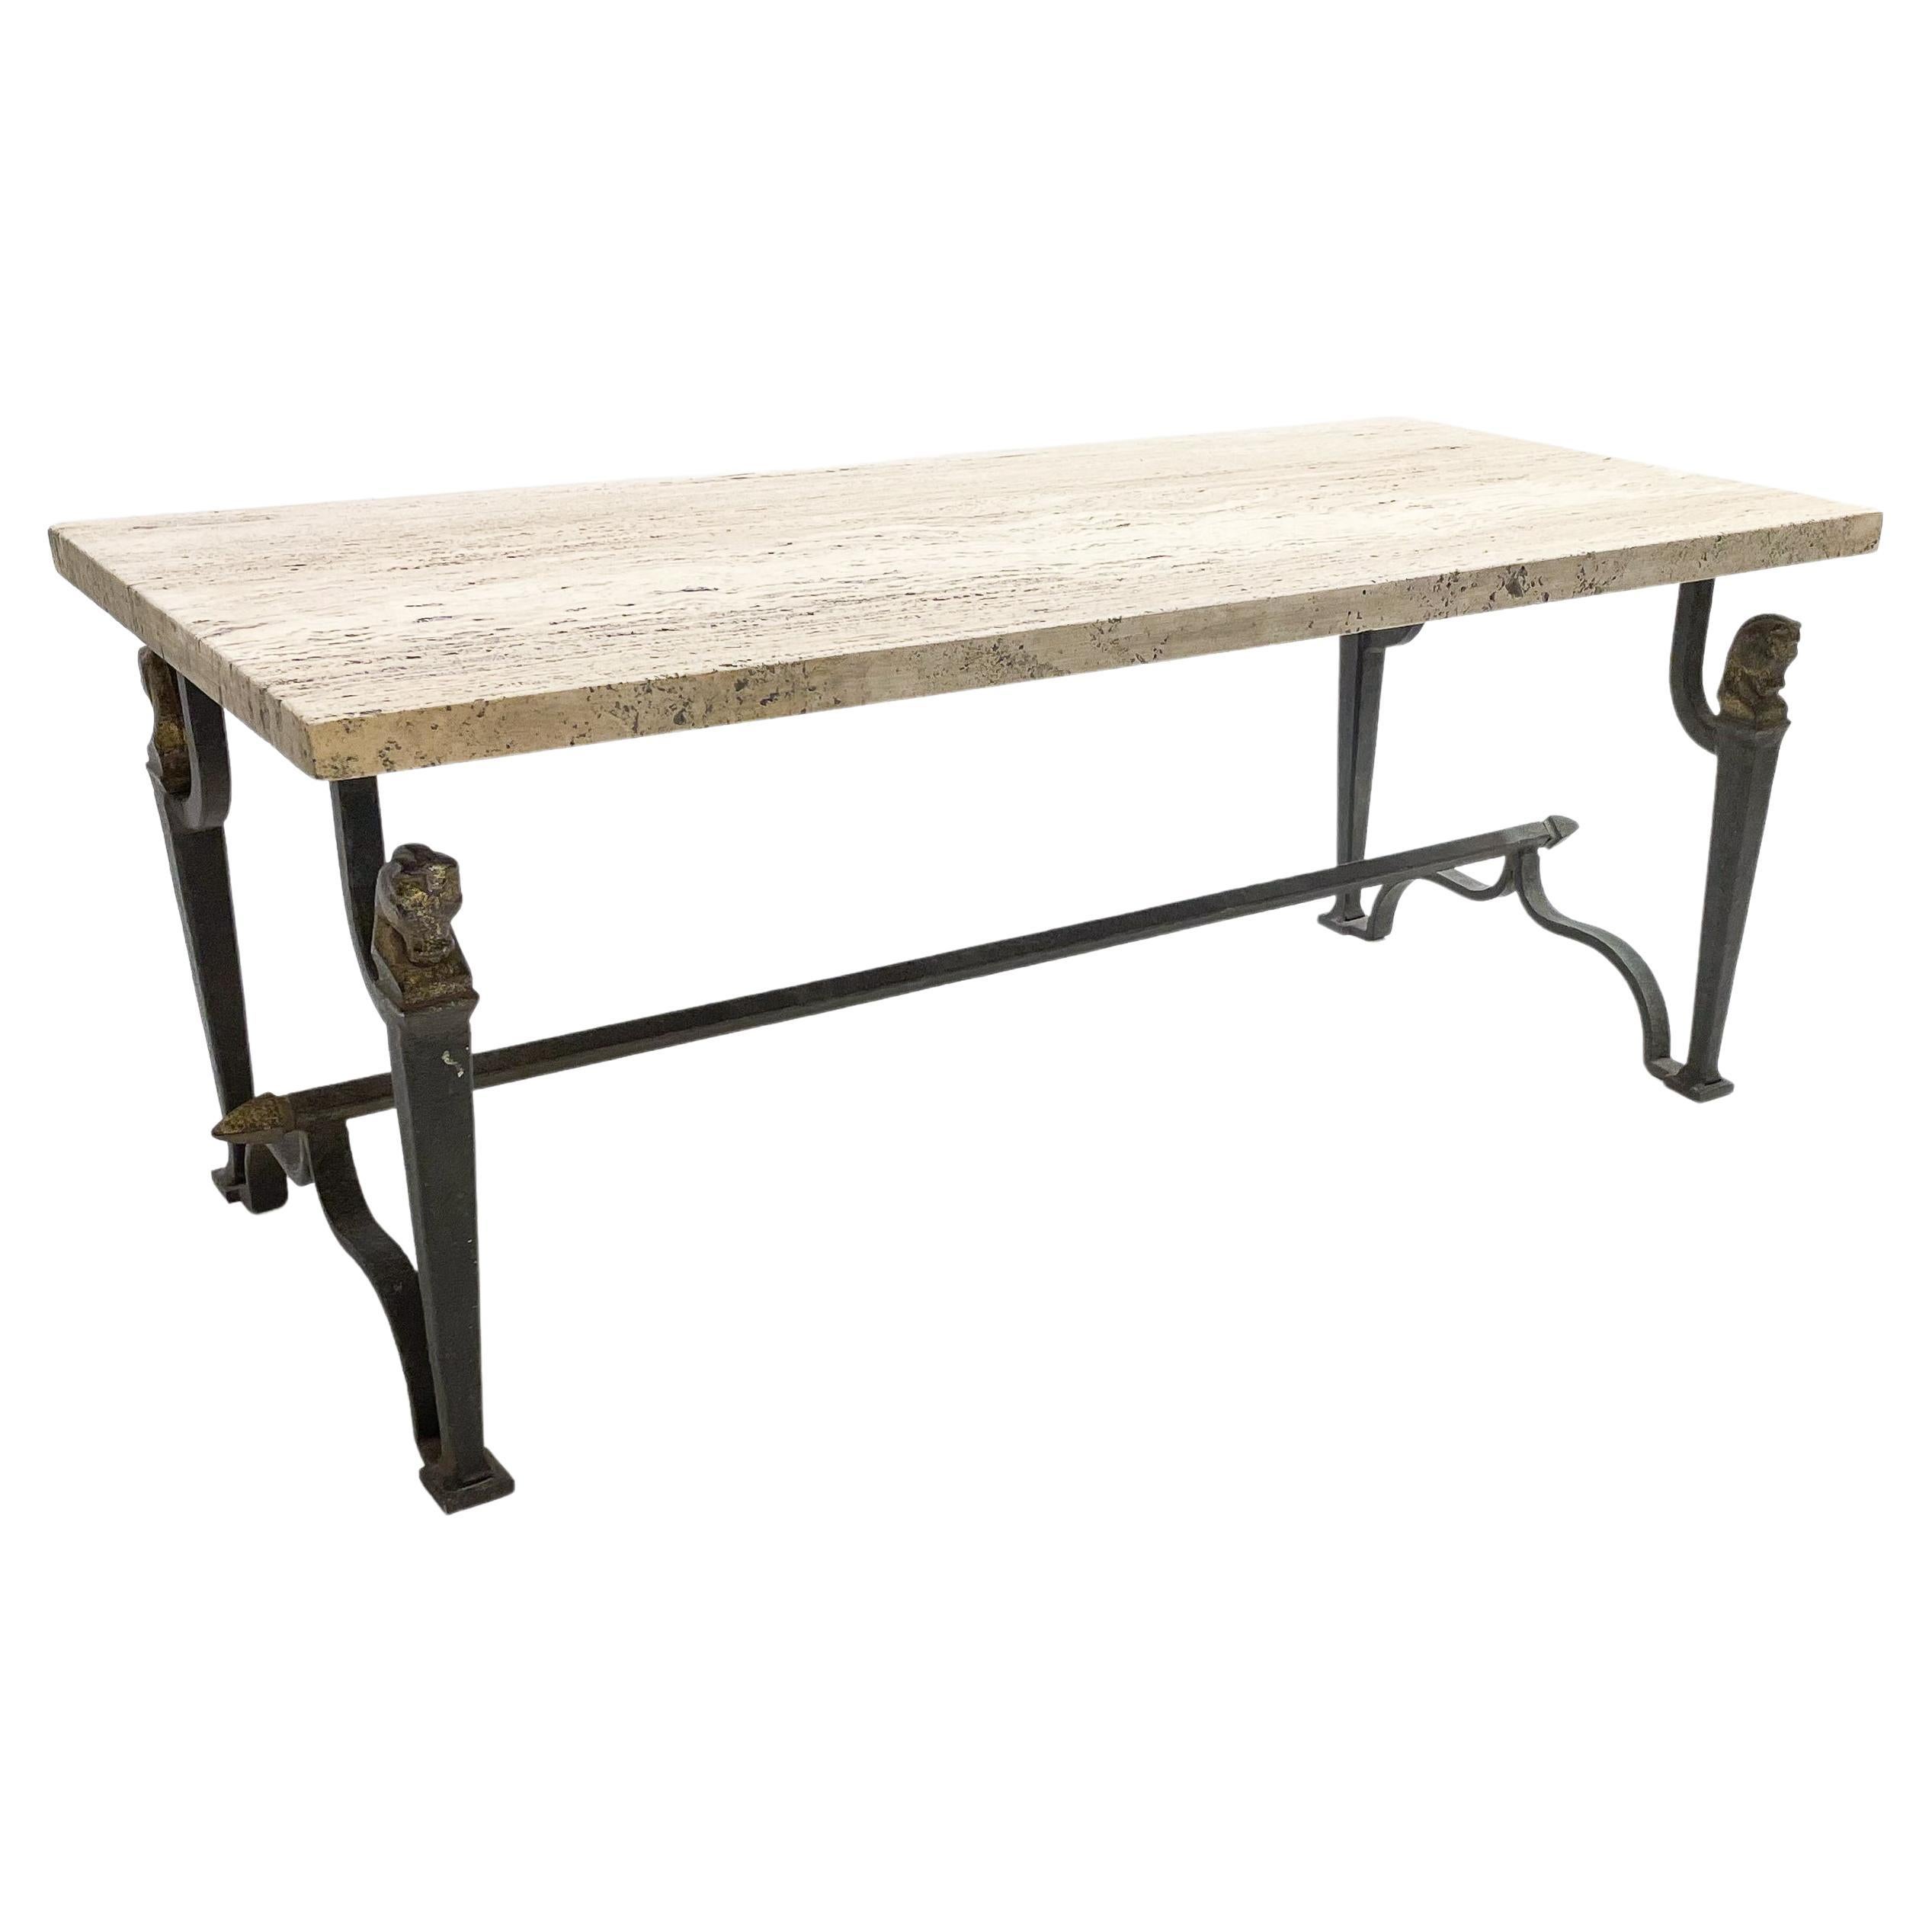 Mid-Century Wrought Iron and Travertine Coffee Table, 1940s For Sale